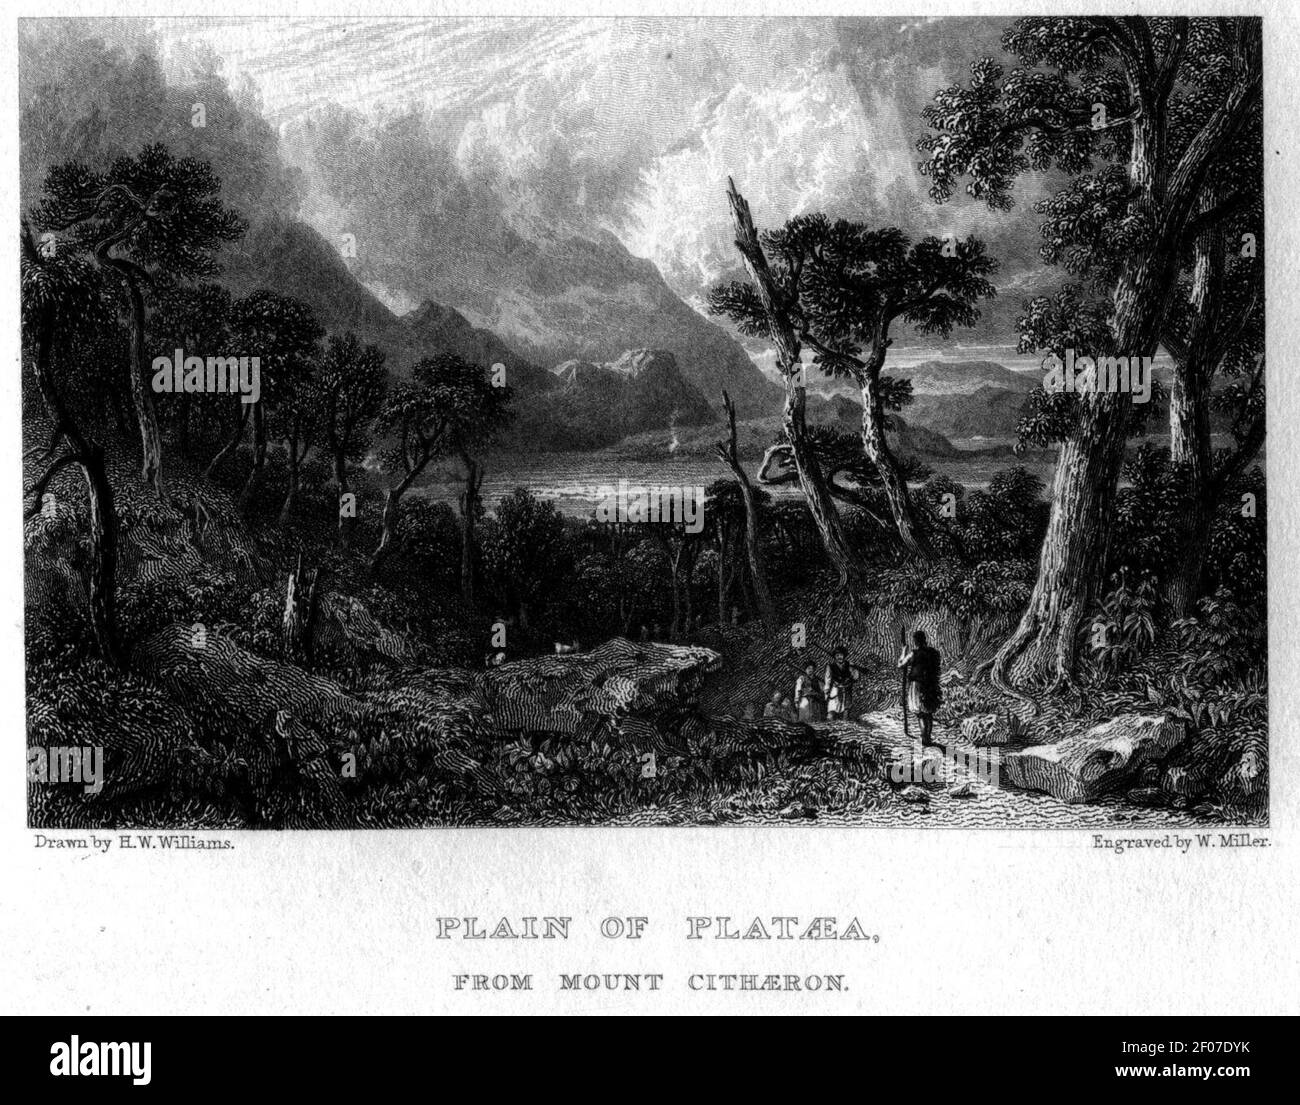 Plain of Plataea, from Mount Cithaeron engraving by William Miller after H W Williams. Stock Photo